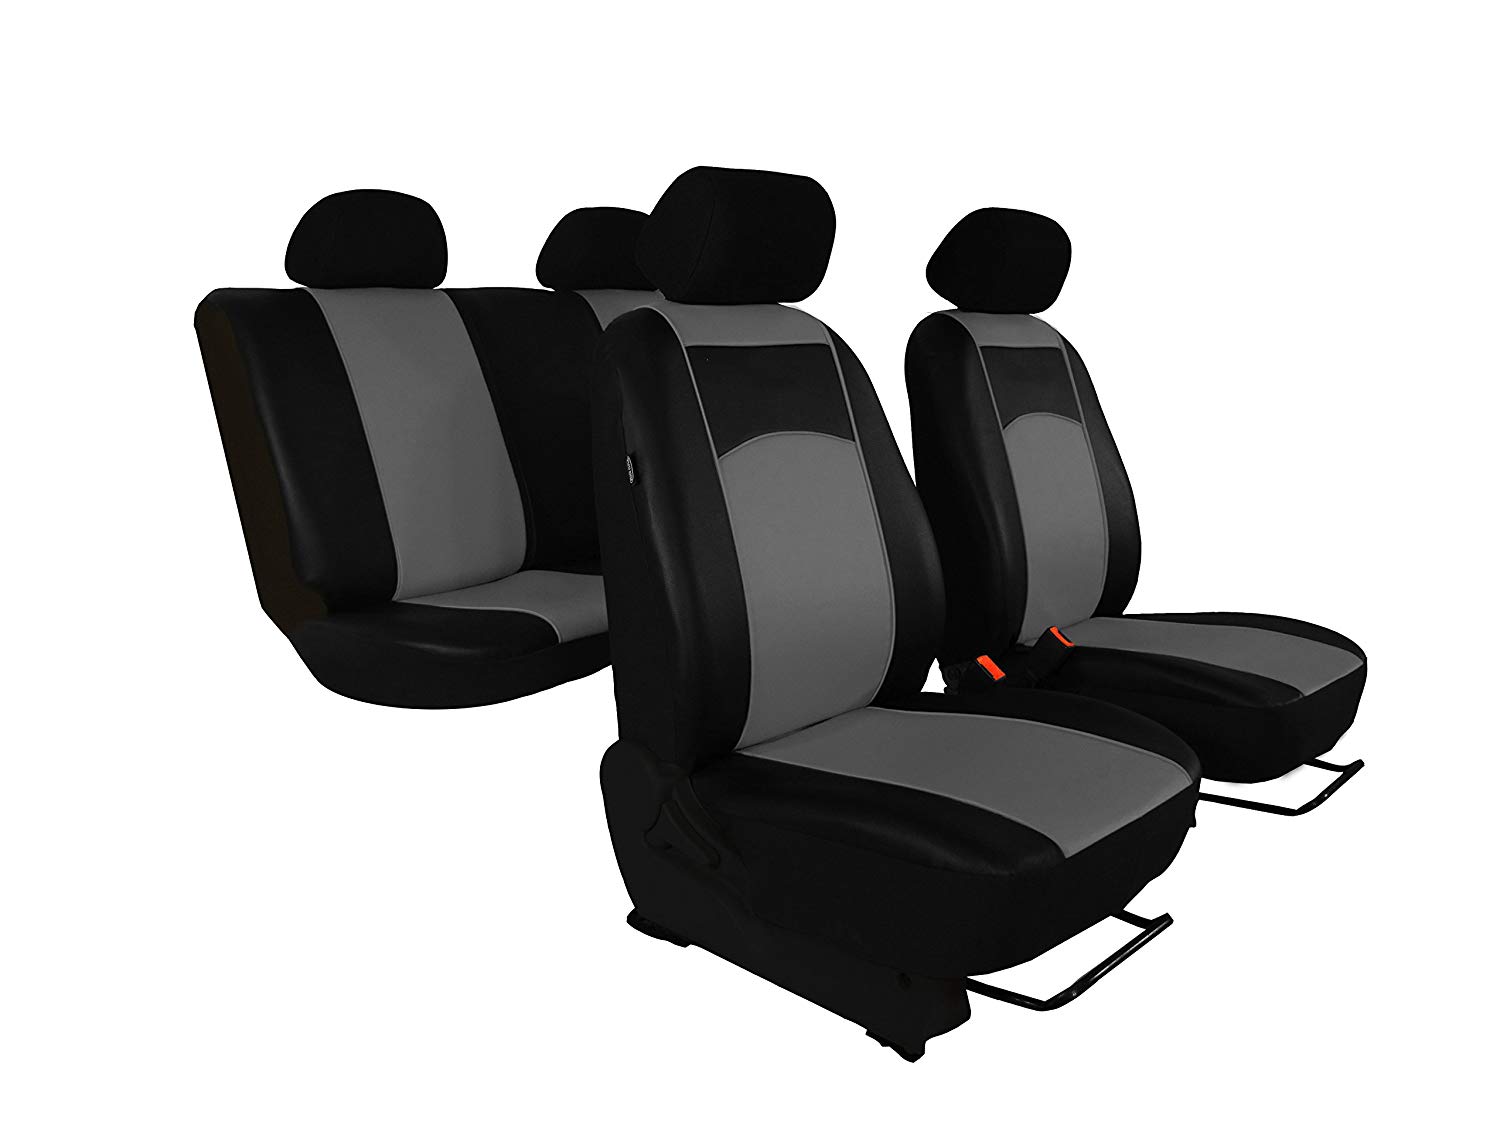 POK-TER-TUNING Exclusive, custom-made, best quality for T6 Transporter 5-seat seat covers / bus covers design in faux leather in 7 colours.